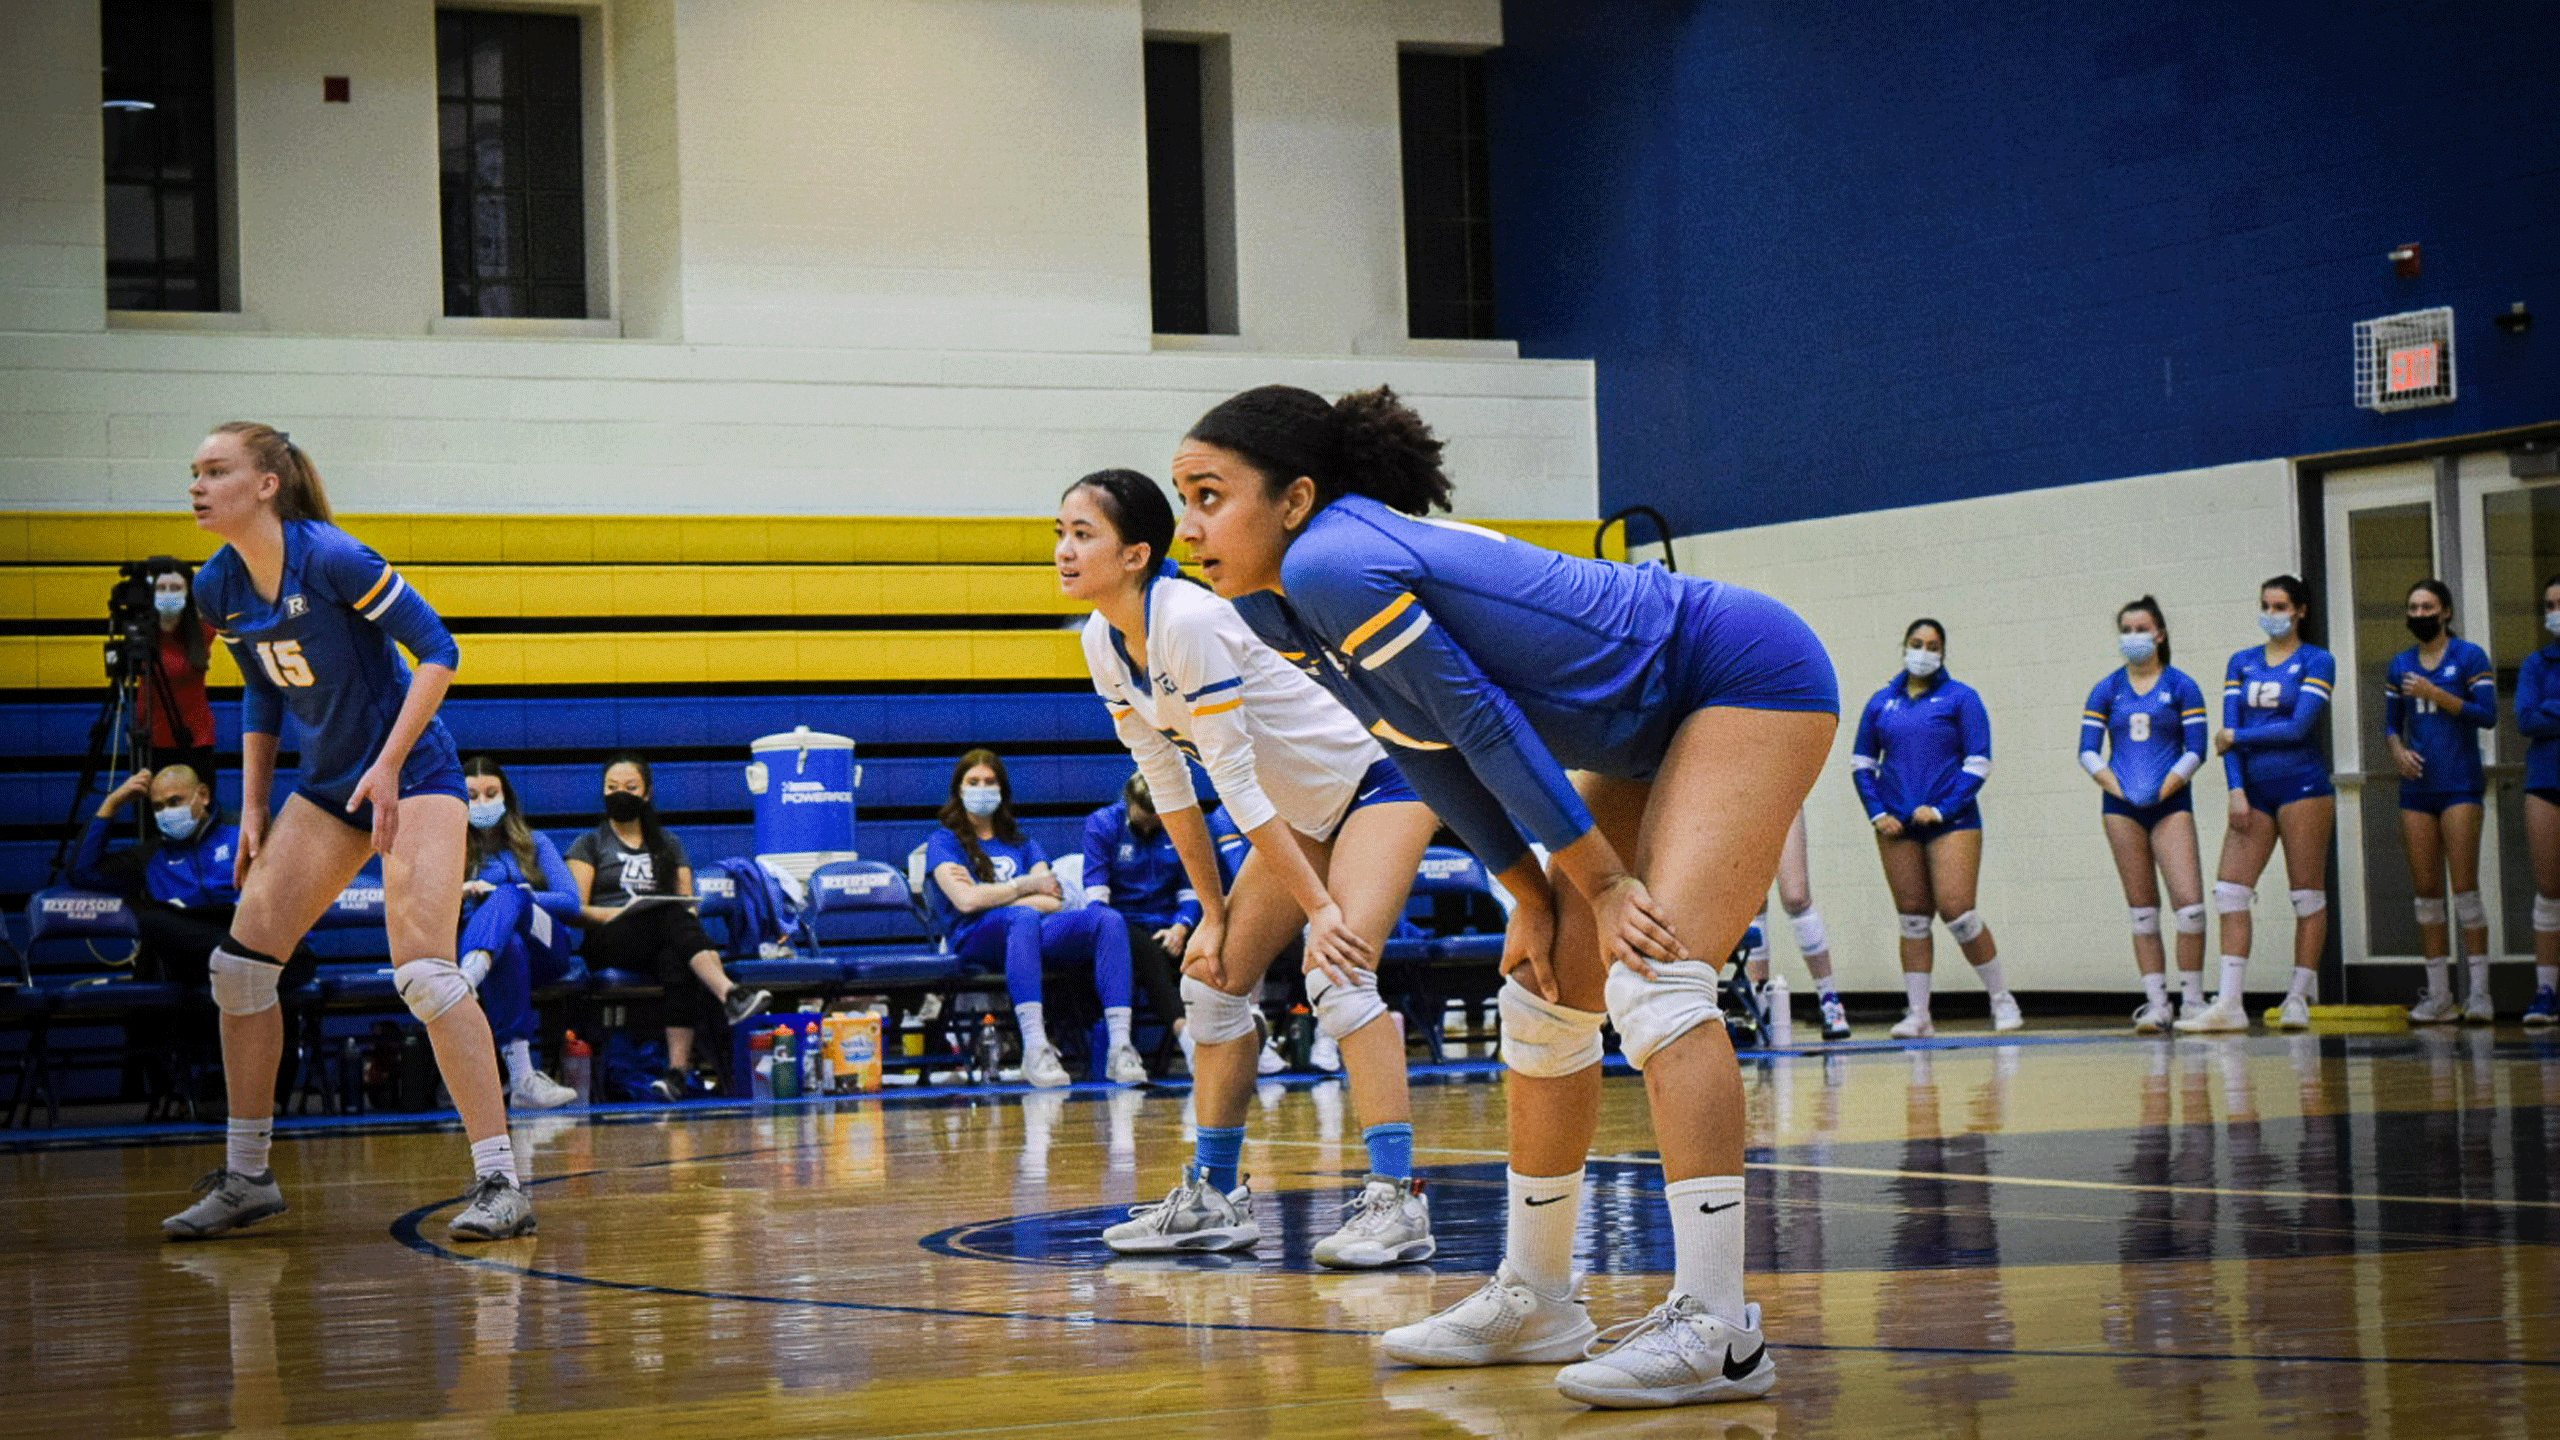 The Rams women's volleyball team in blue and white jerseys stand to receive a serve